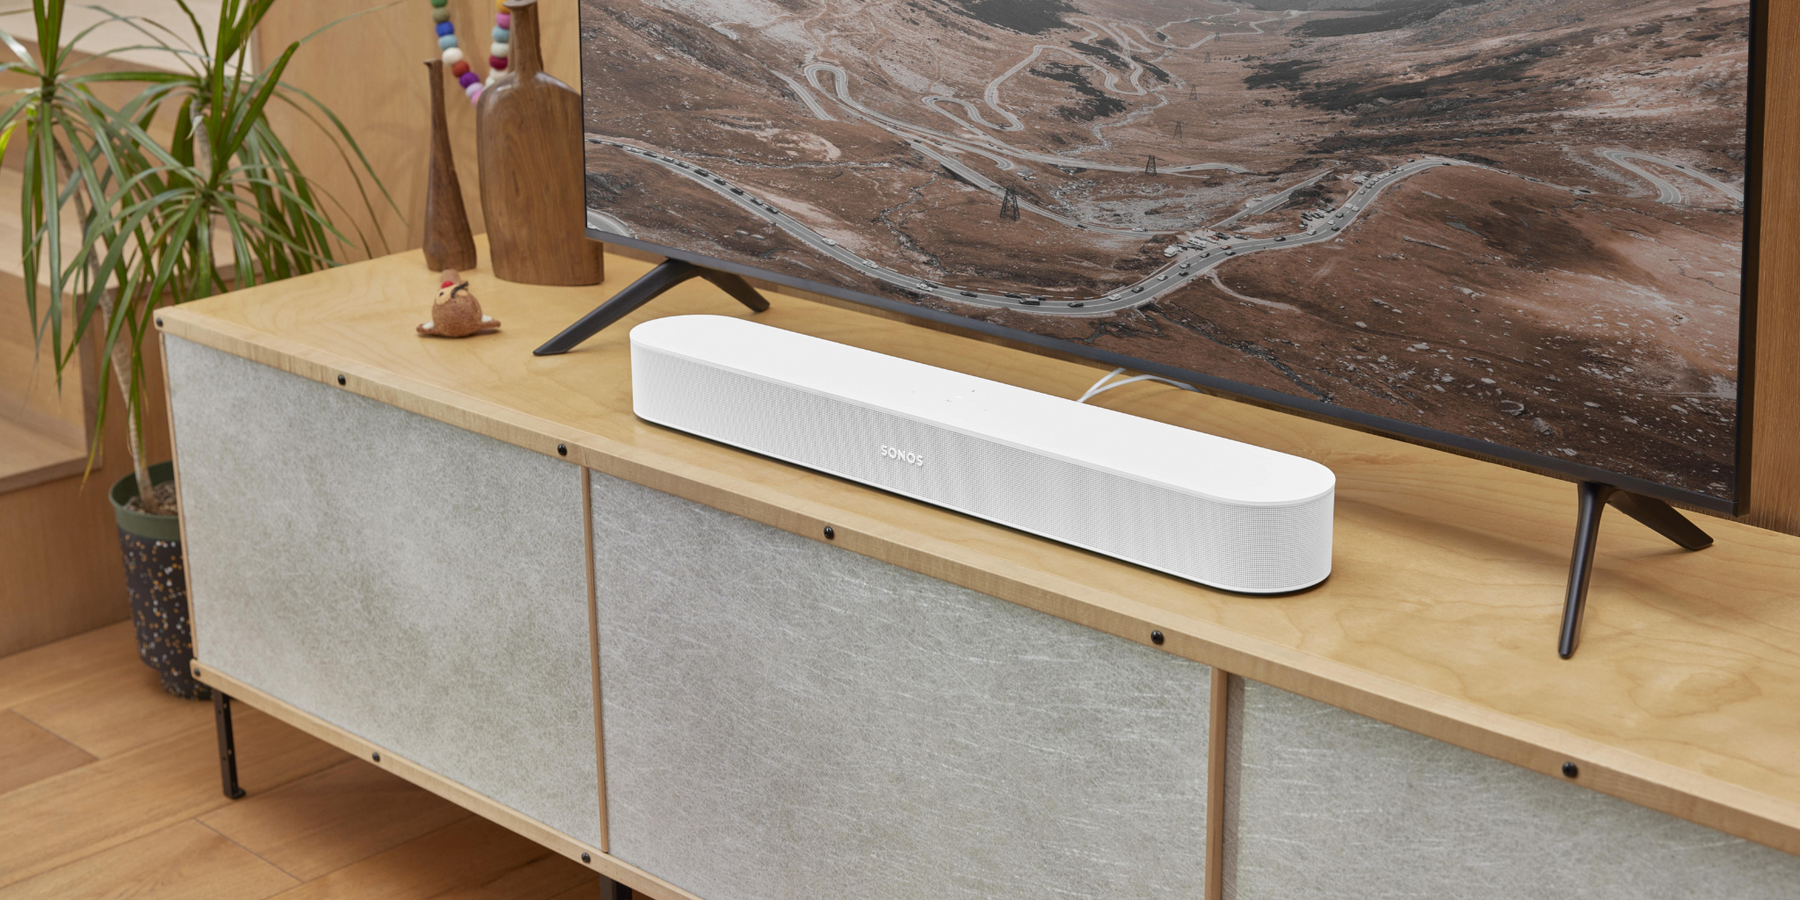 How to choose your sound bar: Sonos and Denon connected bars